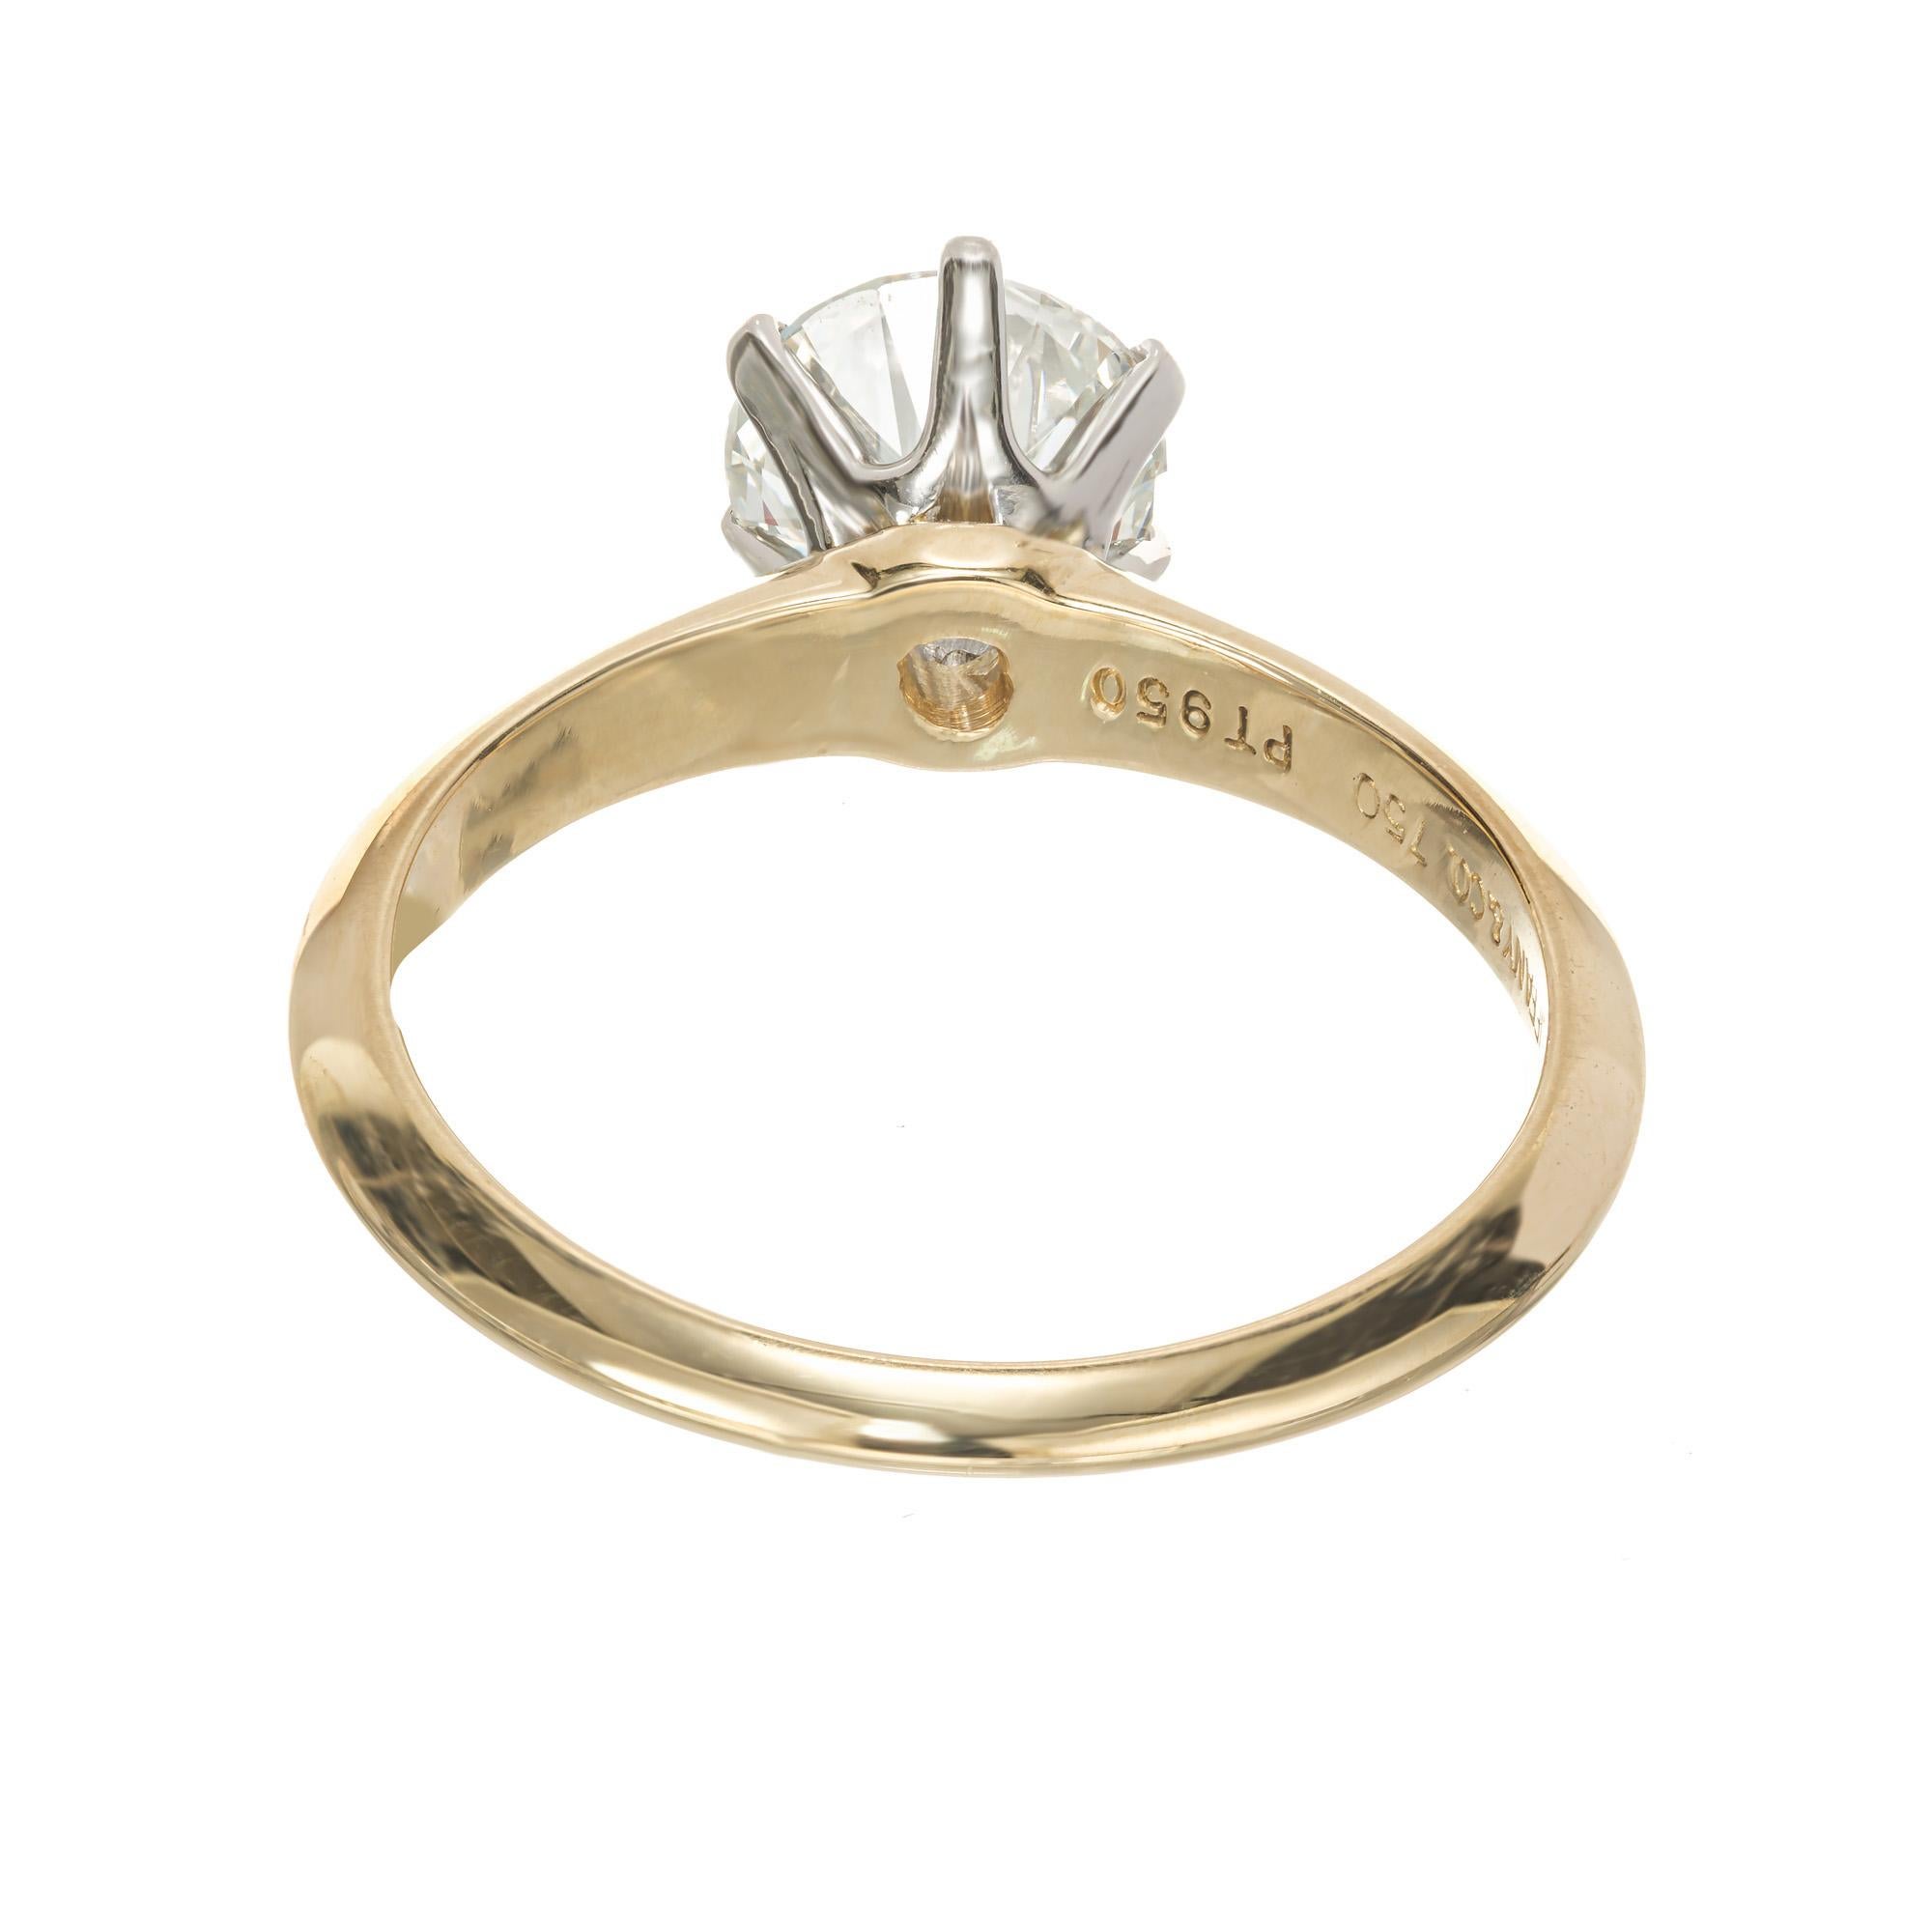 Tiffany & Co GIA 1.00 Carat Diamond Platinum Gold Solitaire Engagement Ring  In Good Condition For Sale In Stamford, CT